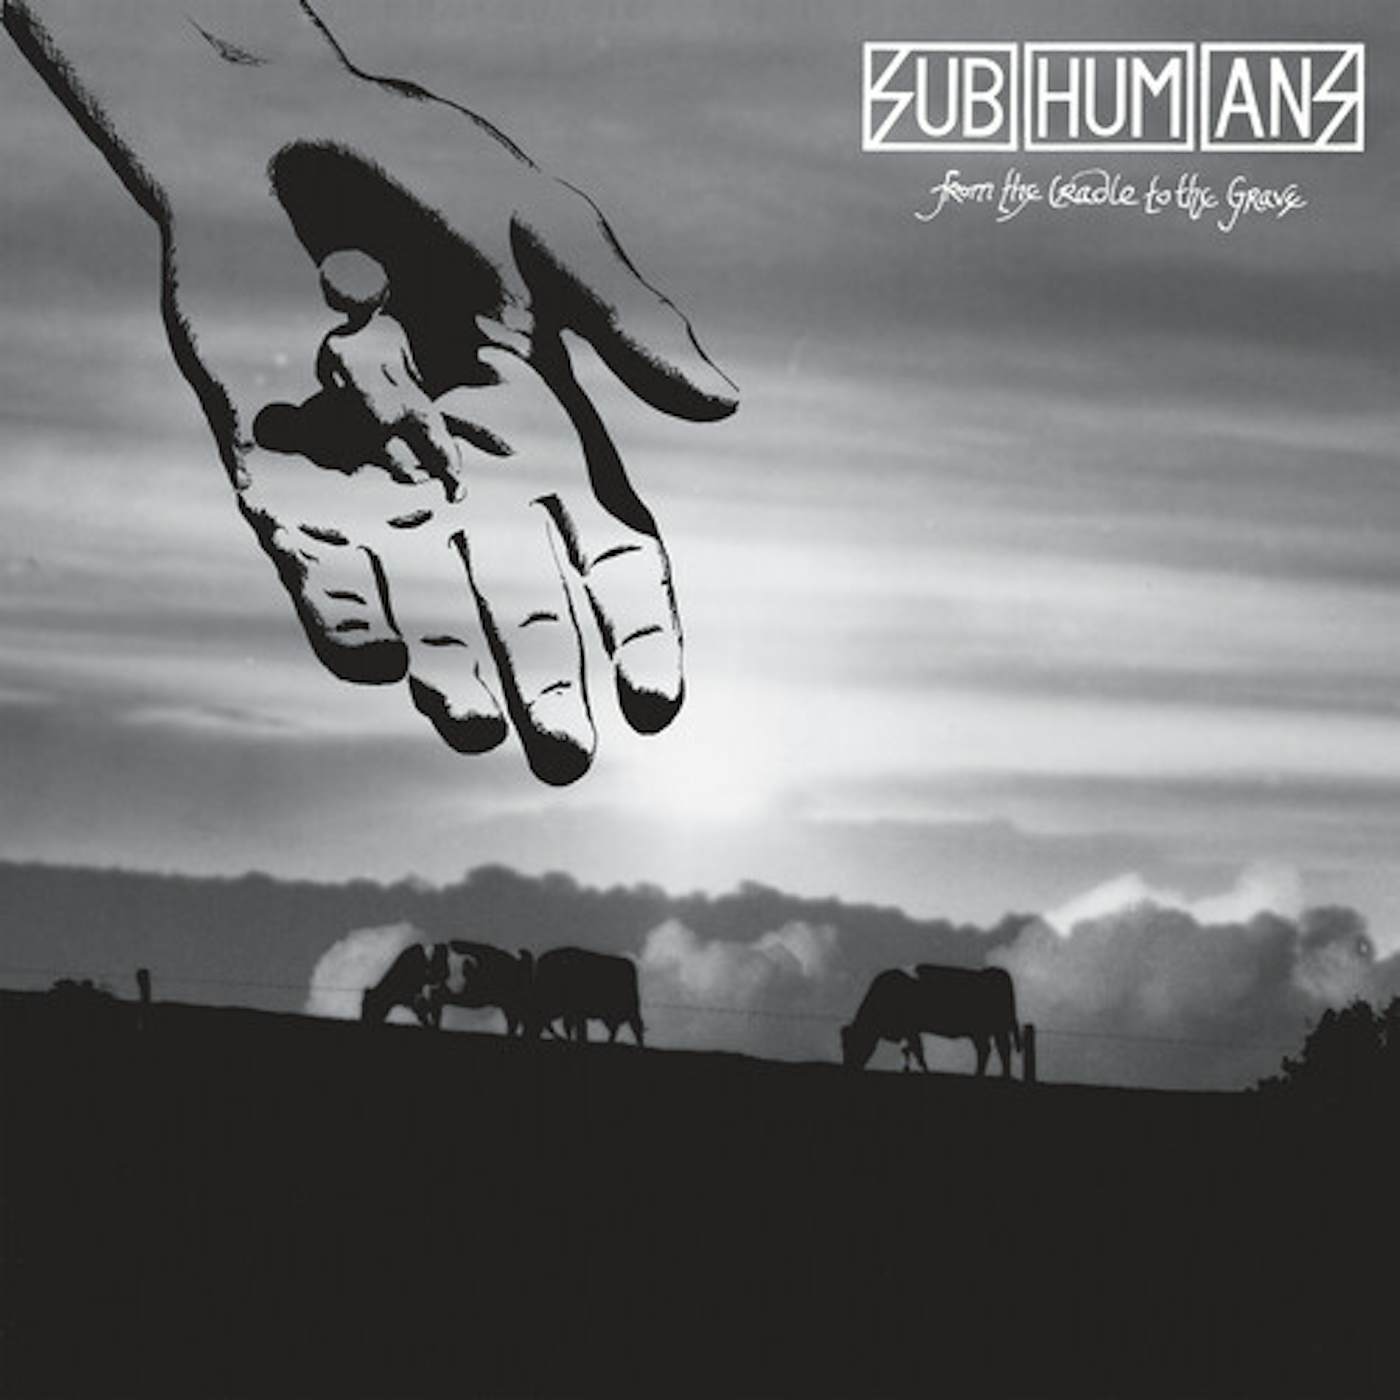 Subhumans From the Cradle to the Grave Vinyl Record